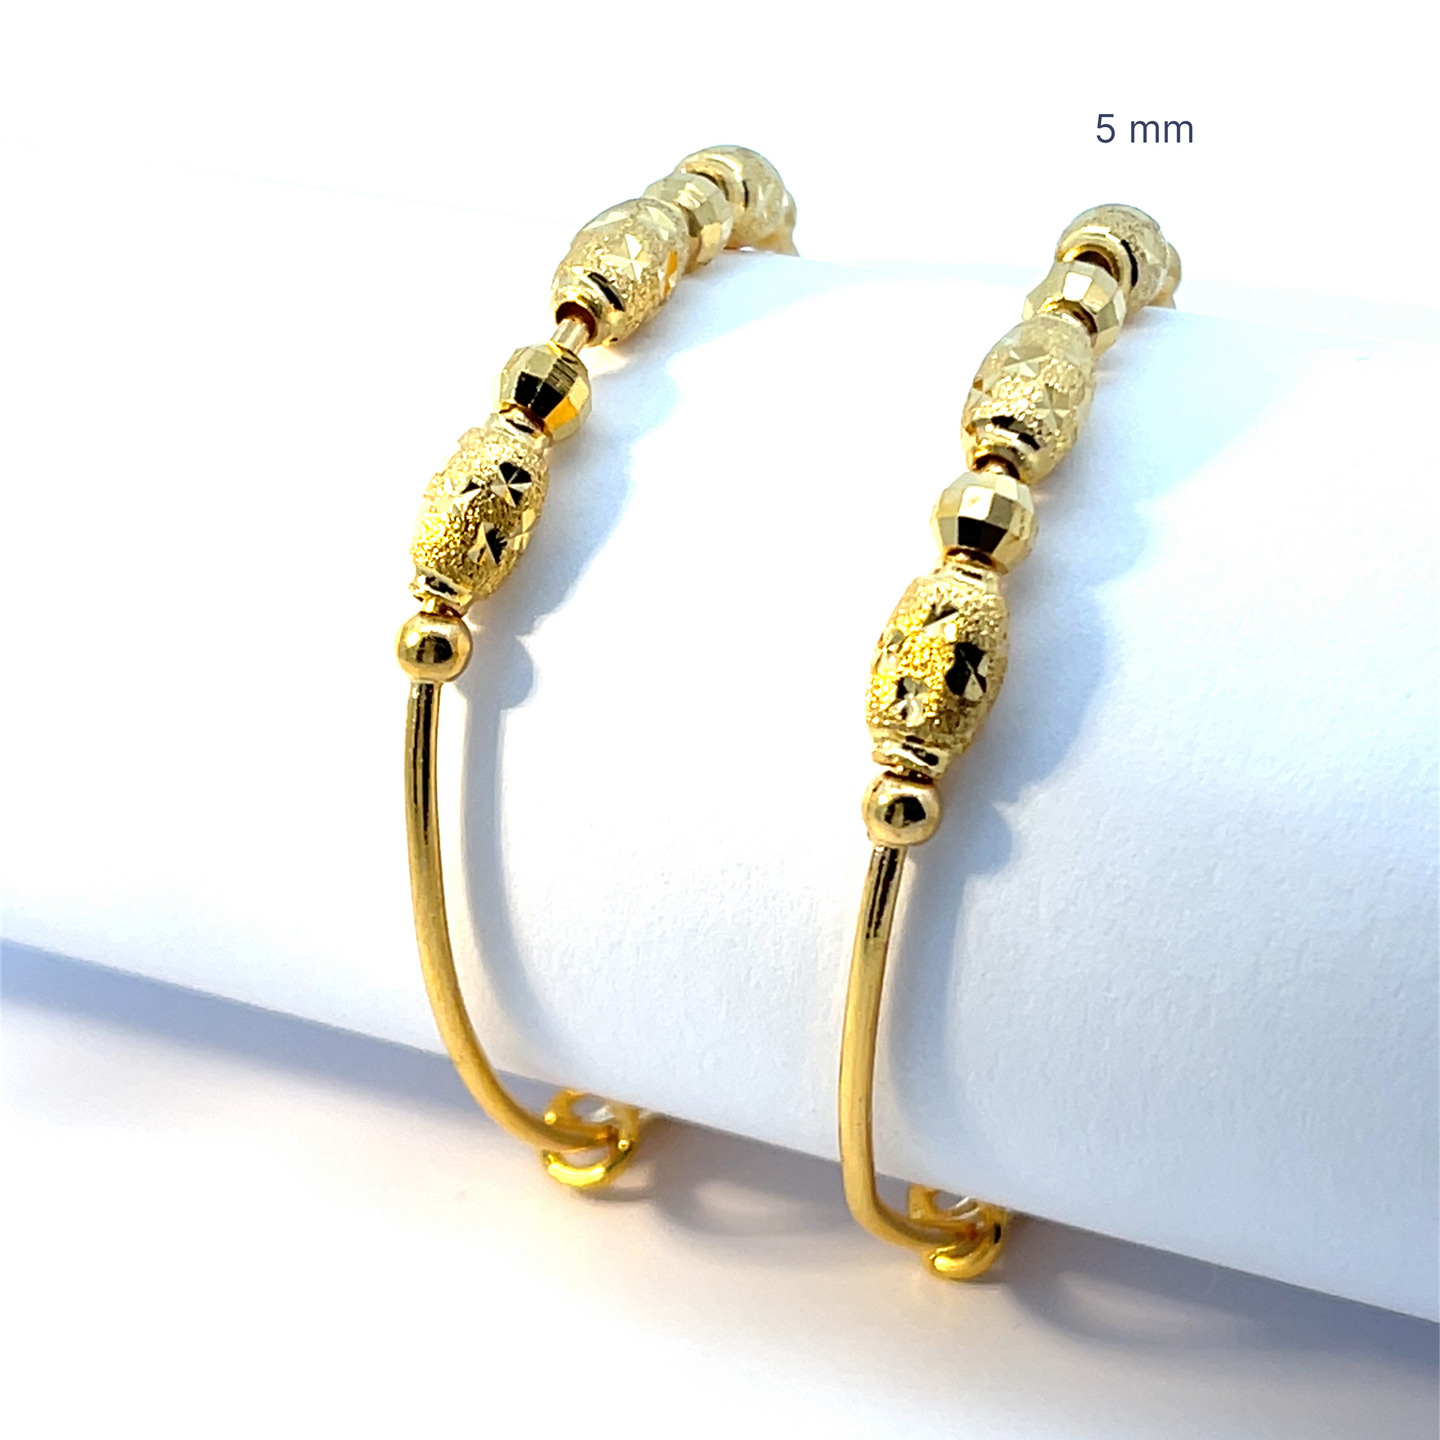 One Pair of 24K Solid Yellow Gold Baby bangles 8.2 Grams